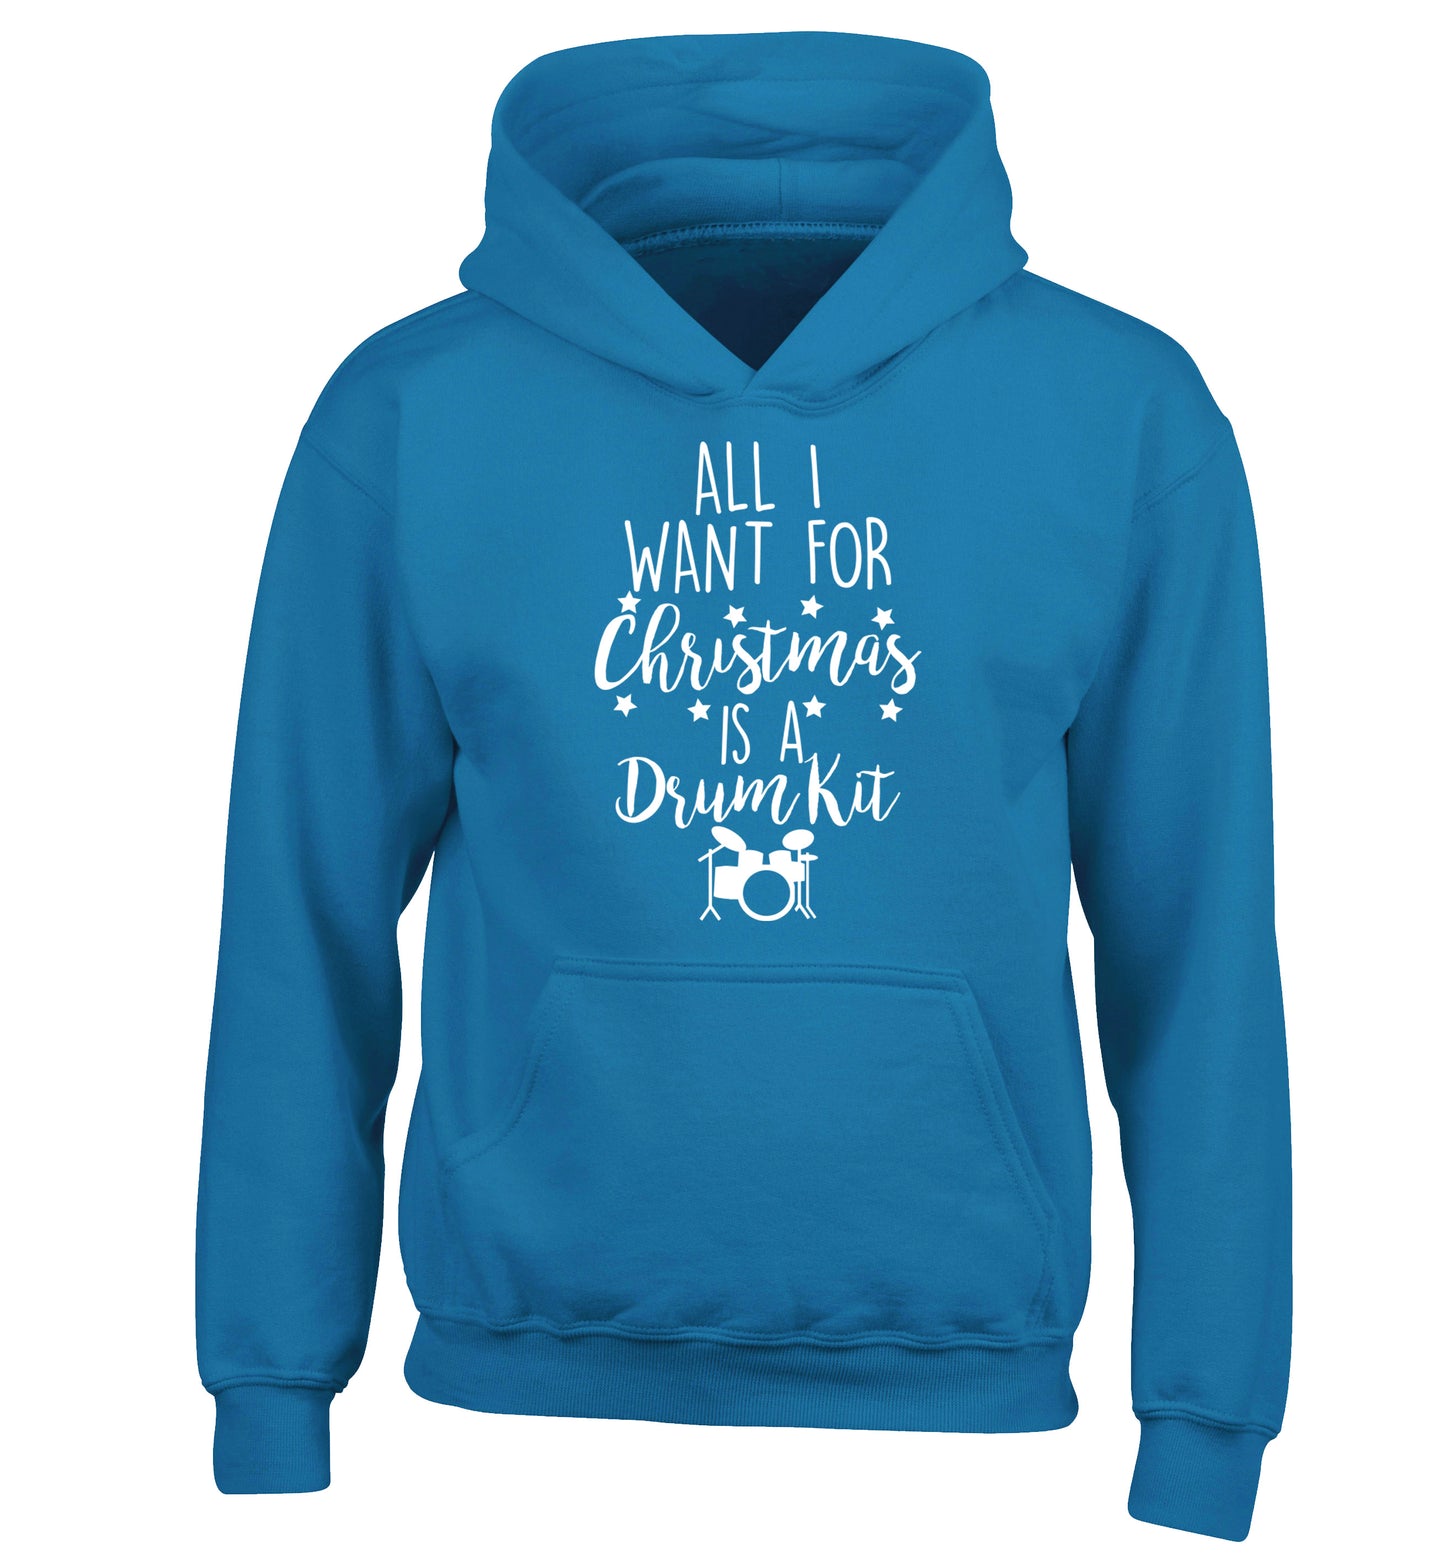 All I want for Christmas is a drum kit! children's blue hoodie 12-14 Years